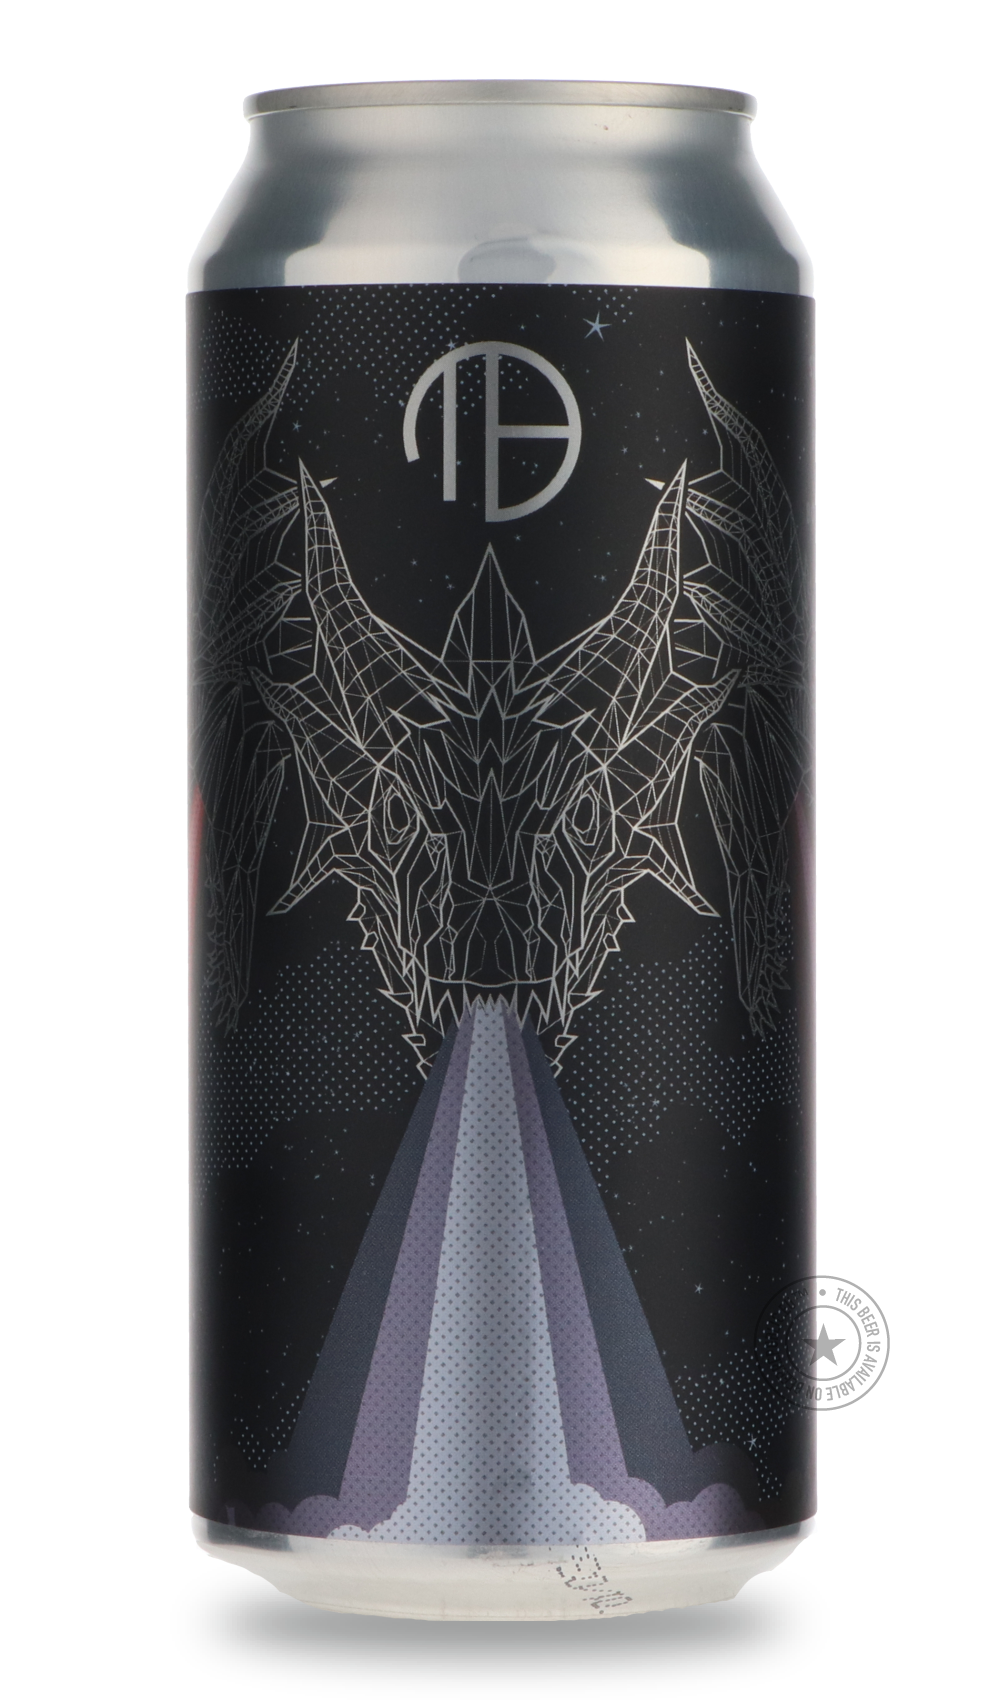 -Mortalis- Hydra | Strawberry + Blueberry + Boysenberry-Sour / Wild & Fruity- Only @ Beer Republic - The best online beer store for American & Canadian craft beer - Buy beer online from the USA and Canada - Bier online kopen - Amerikaans bier kopen - Craft beer store - Craft beer kopen - Amerikanisch bier kaufen - Bier online kaufen - Acheter biere online - IPA - Stout - Porter - New England IPA - Hazy IPA - Imperial Stout - Barrel Aged - Barrel Aged Imperial Stout - Brown - Dark beer - Blond - Blonde - Pil